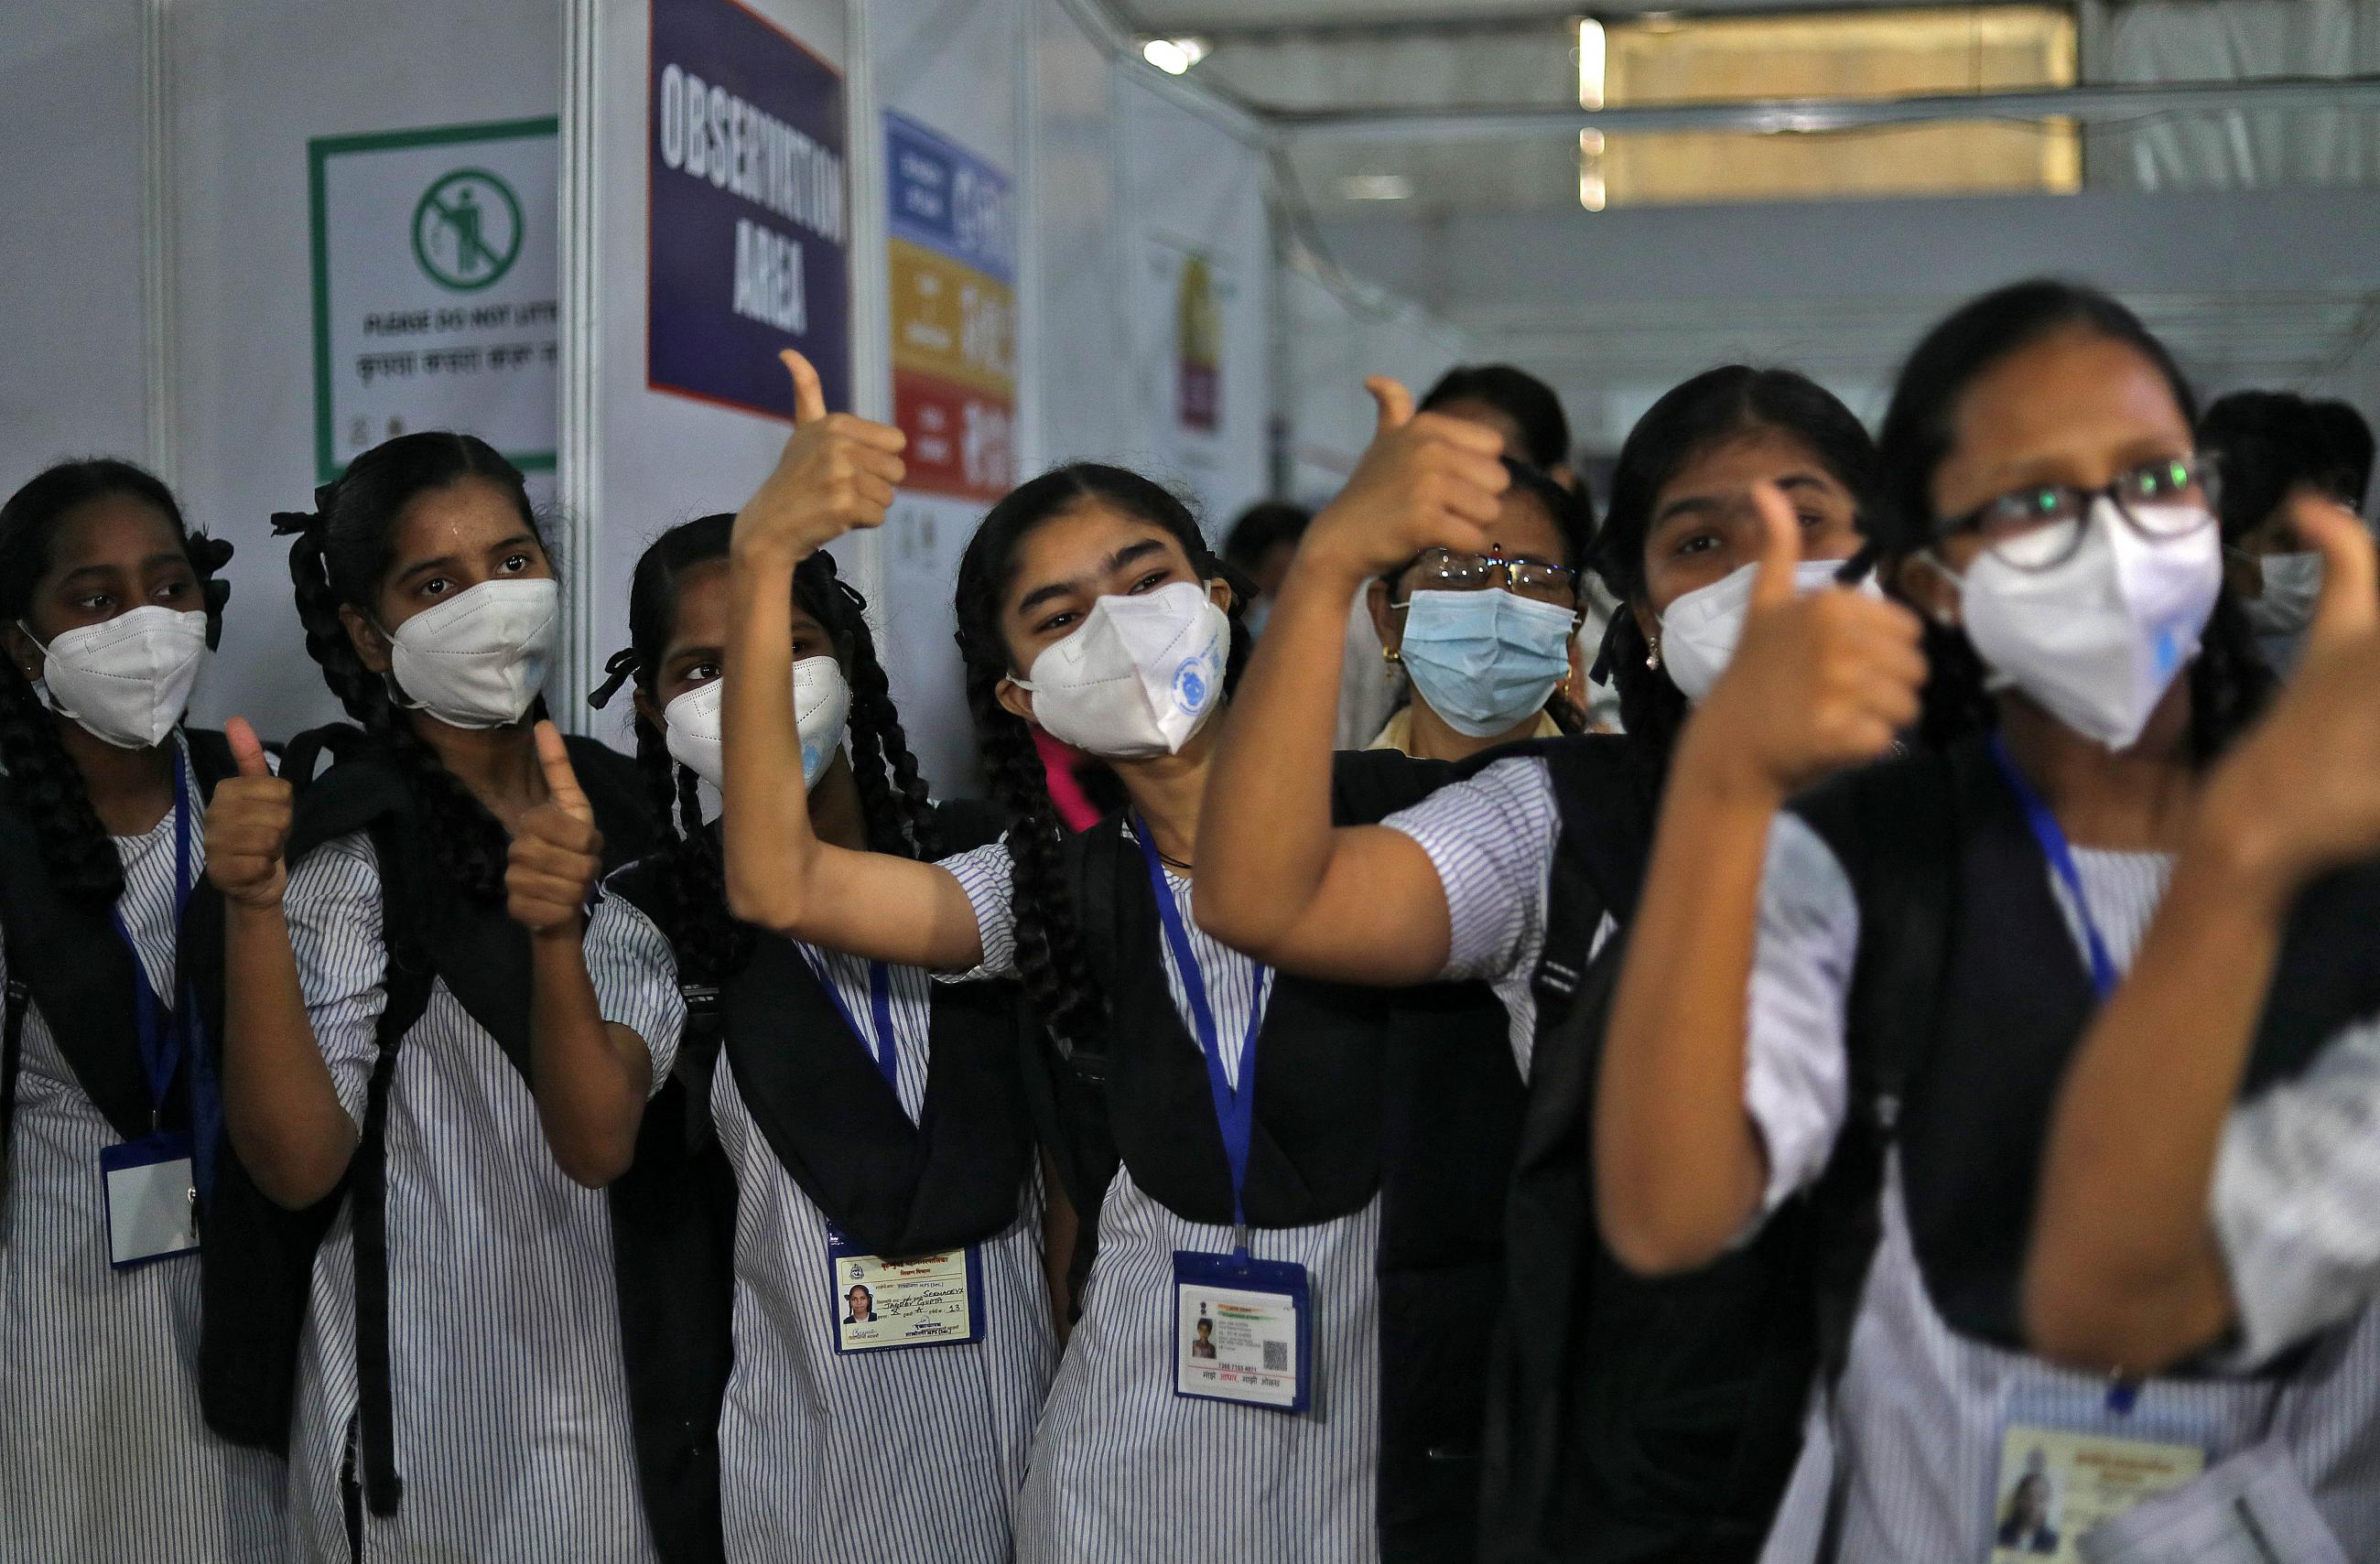 Girls dressed in white and blue striped uniforms with black scarves gesture after receiving a dose of Bharat Biotech's COVID-19 vaccine, Covaxin, during a vaccination drive for children aged 15-18 in Mumbai, India, on January 3, 2022. REUTERS/Niharika Kulkarni